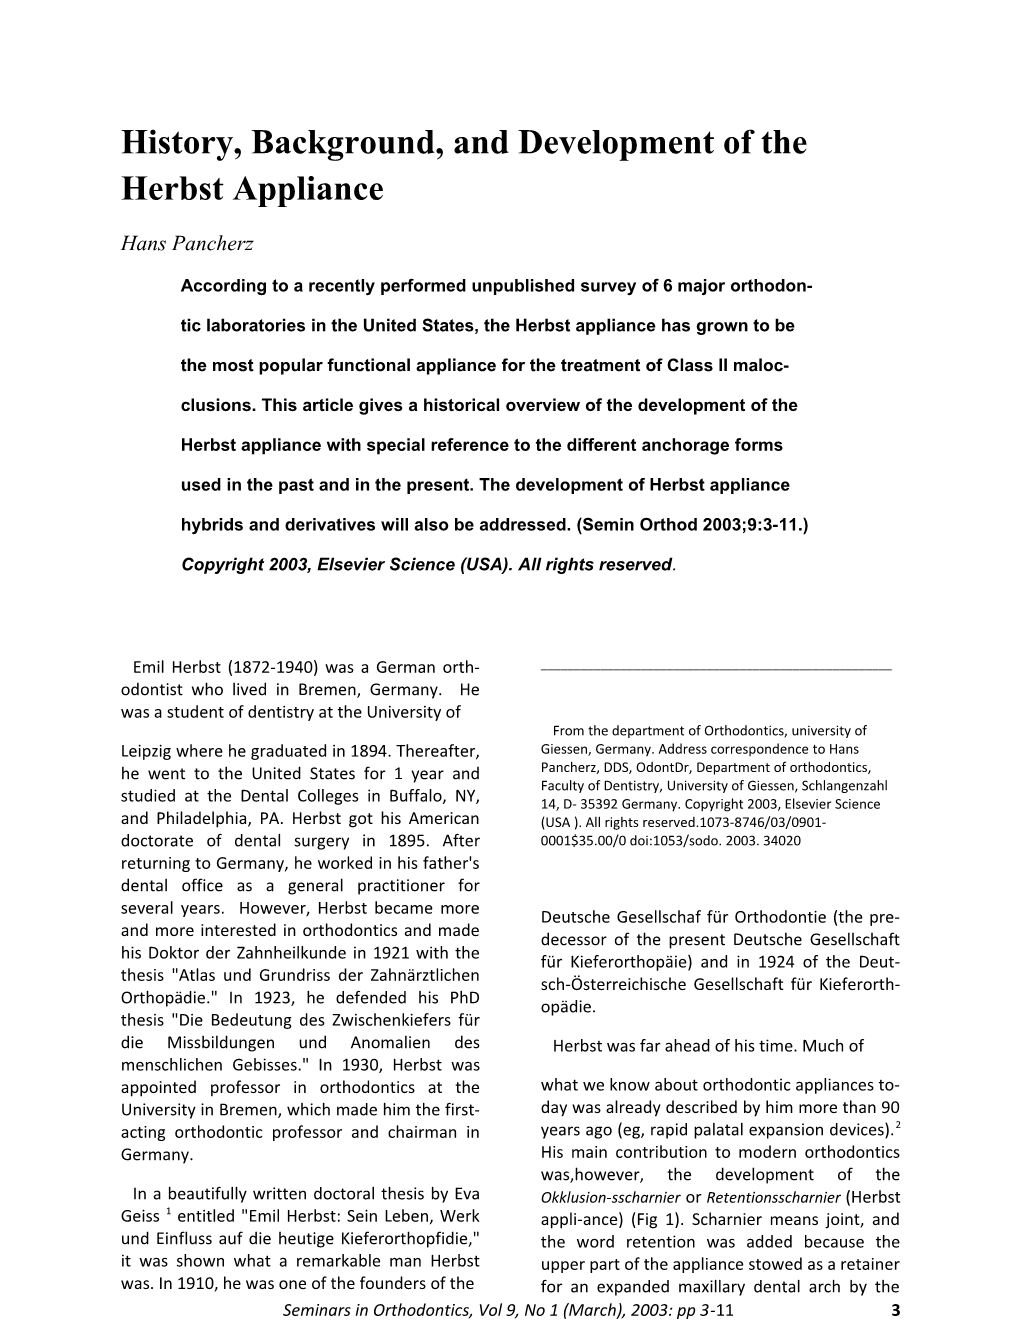 History, Background, and Development of the Herbst Appliance